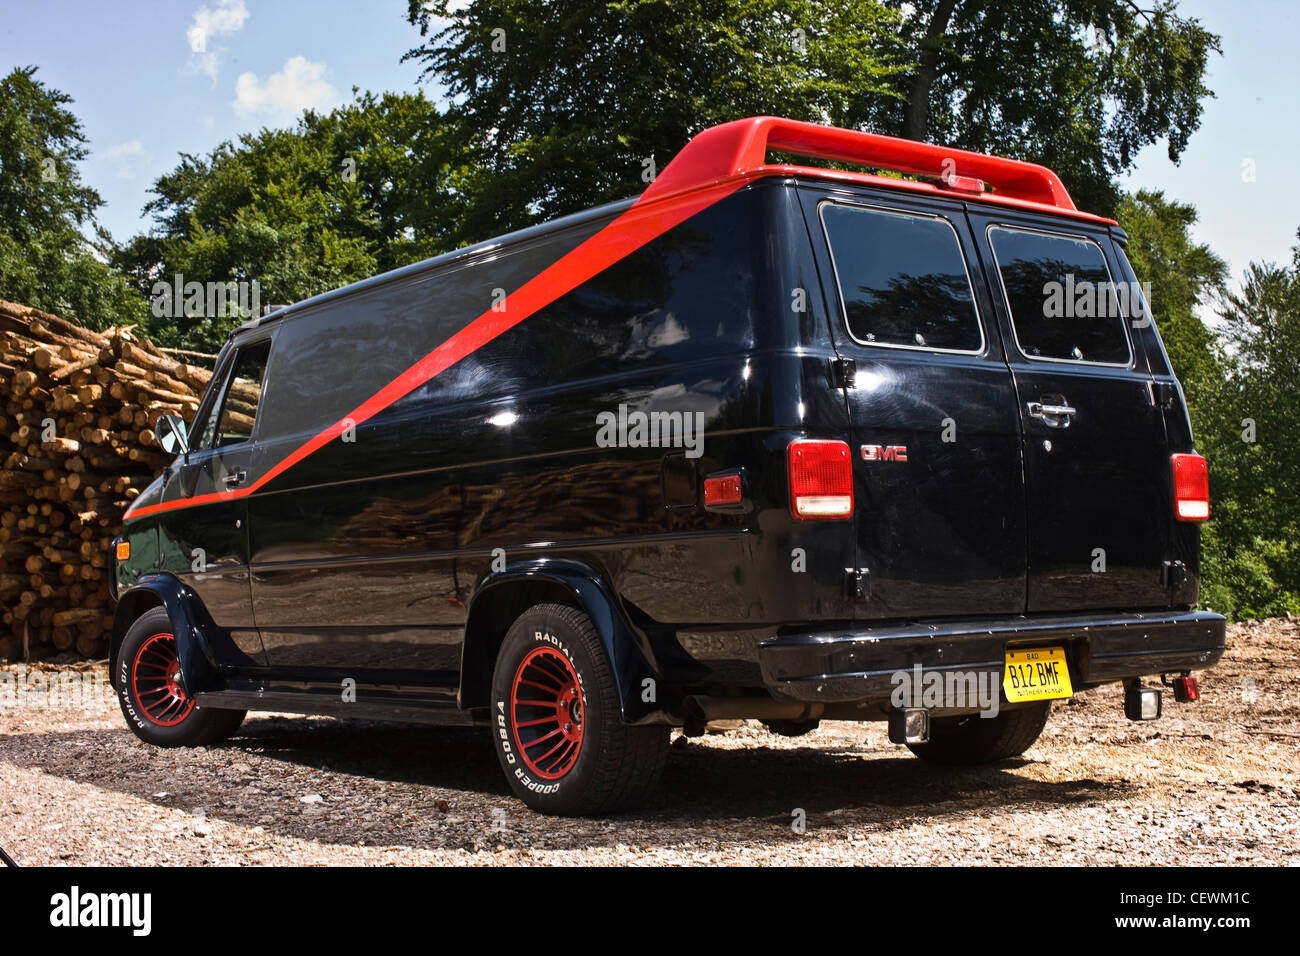 A-Team action van, black with red stripe, Winchester Stock Photo